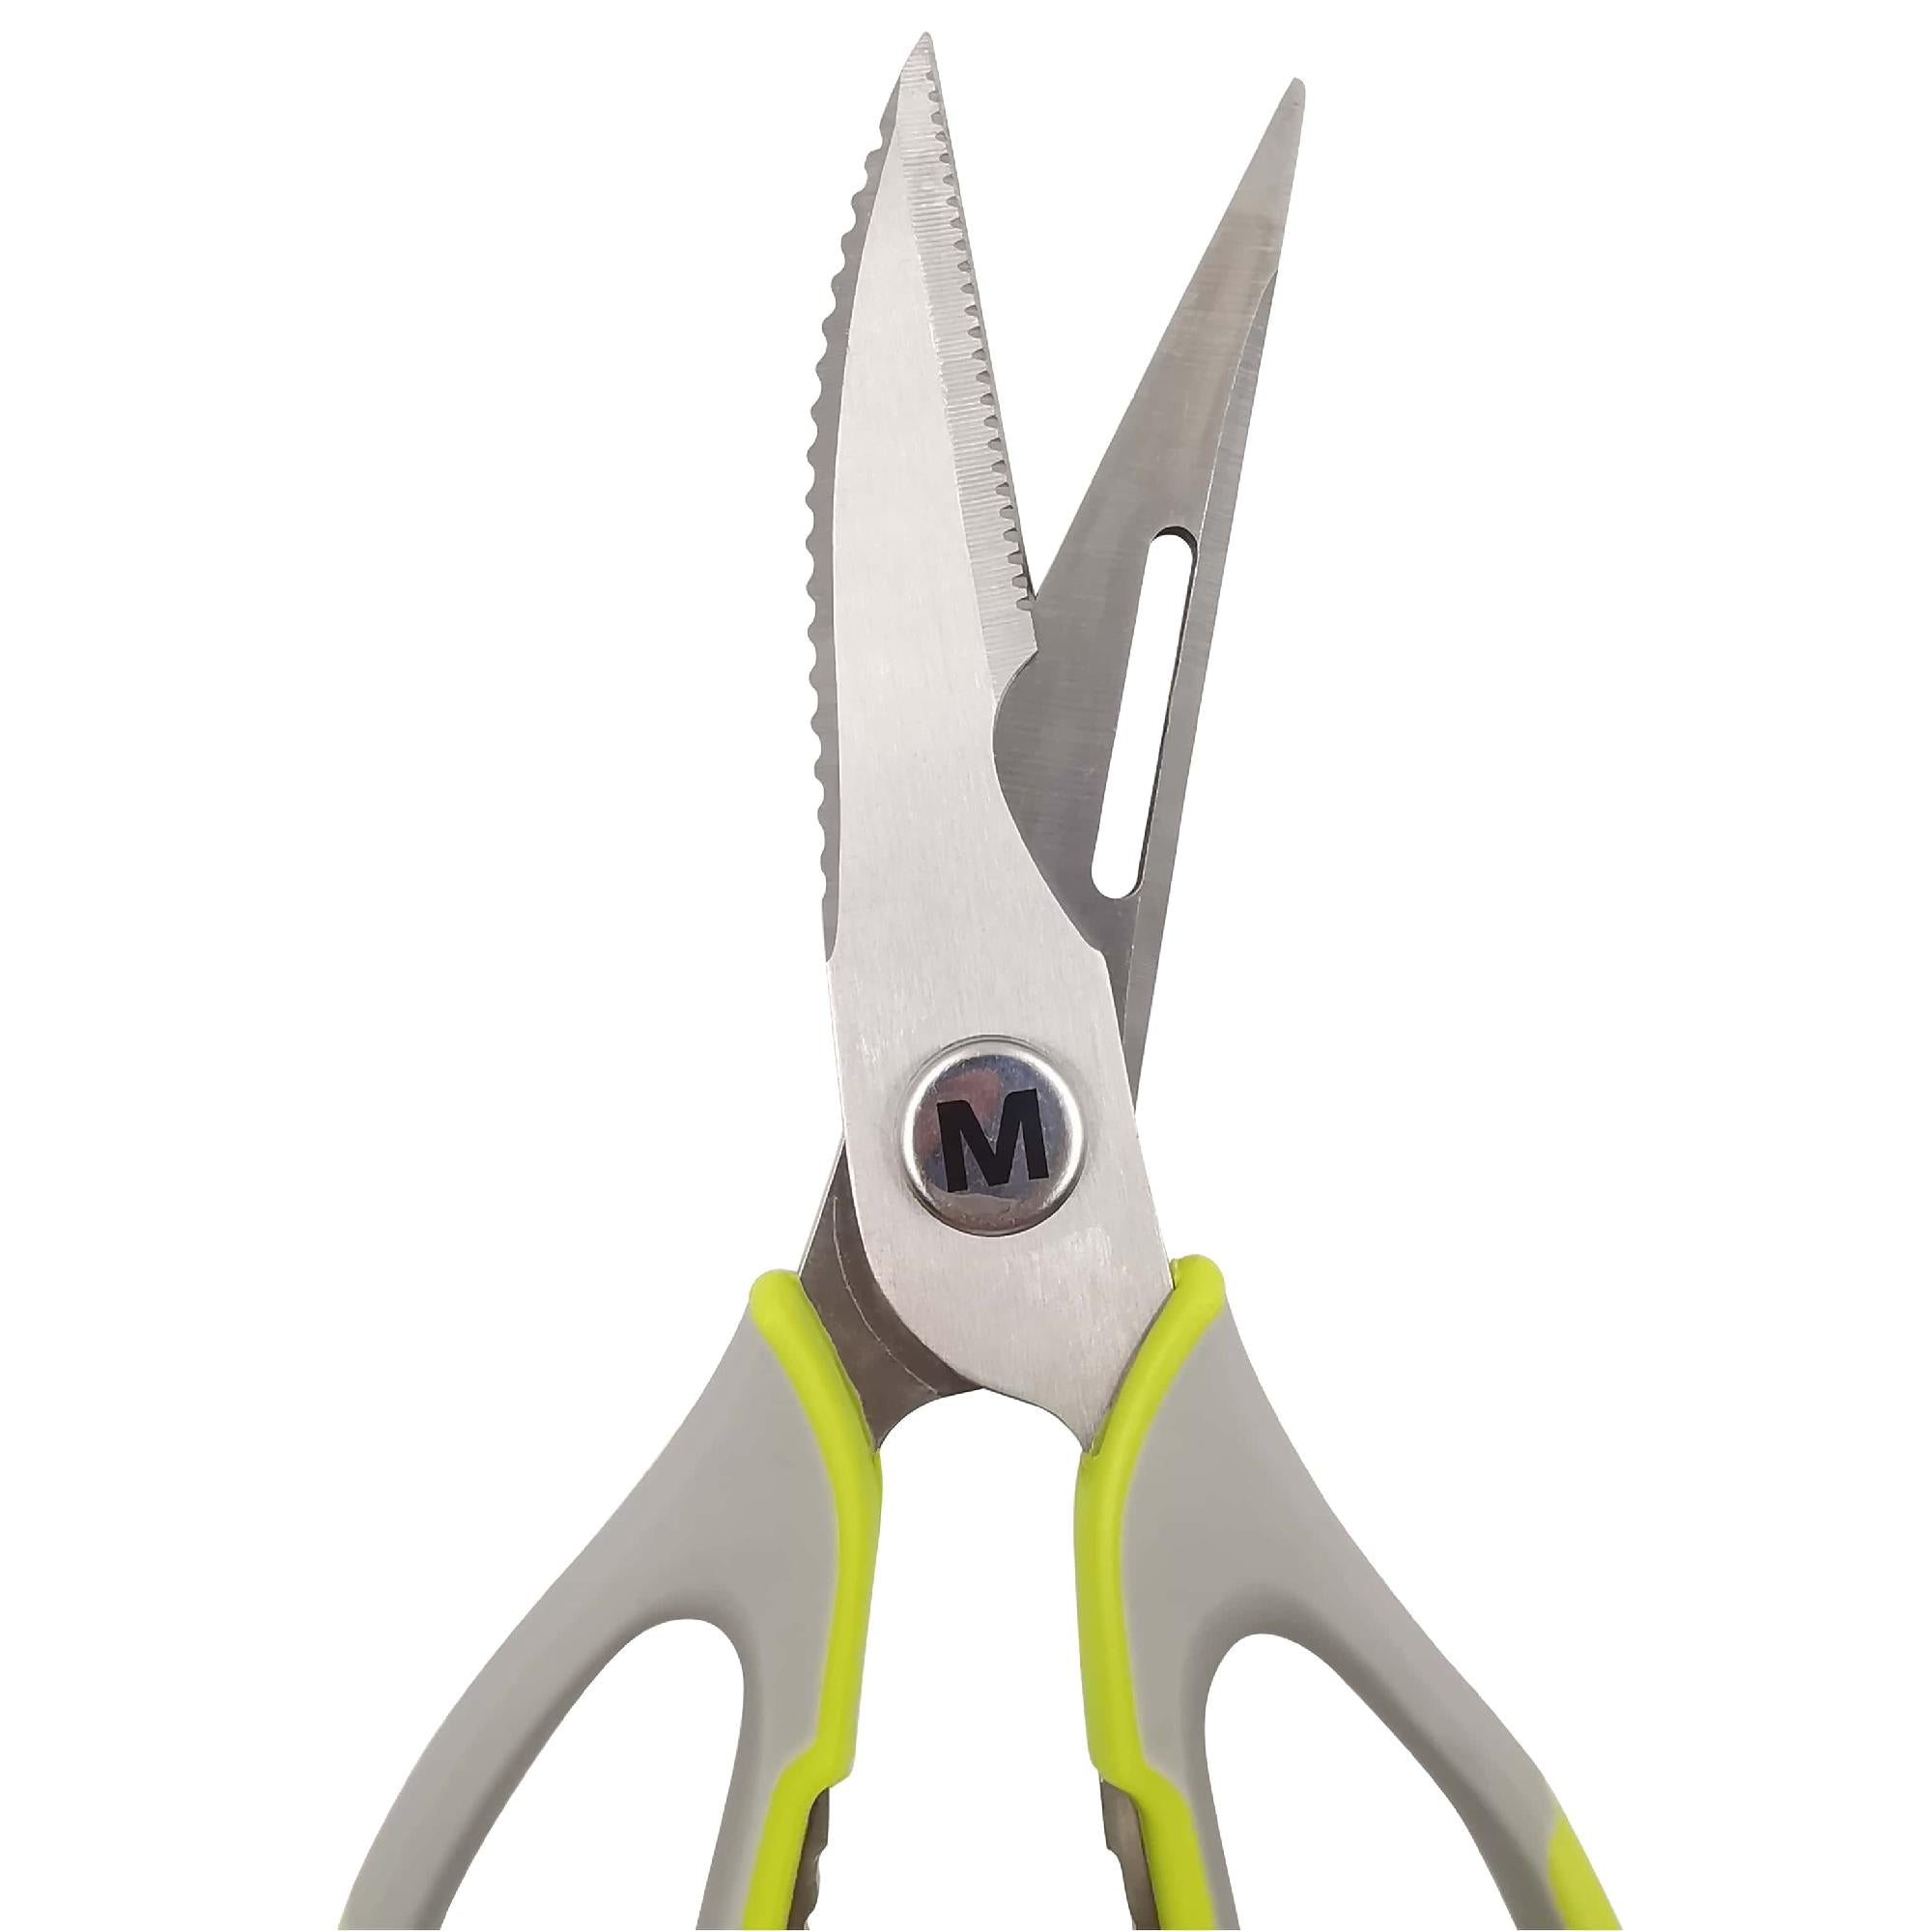 Buy Mustad Micro Braid Scissors with Sheath and Lanyard online at